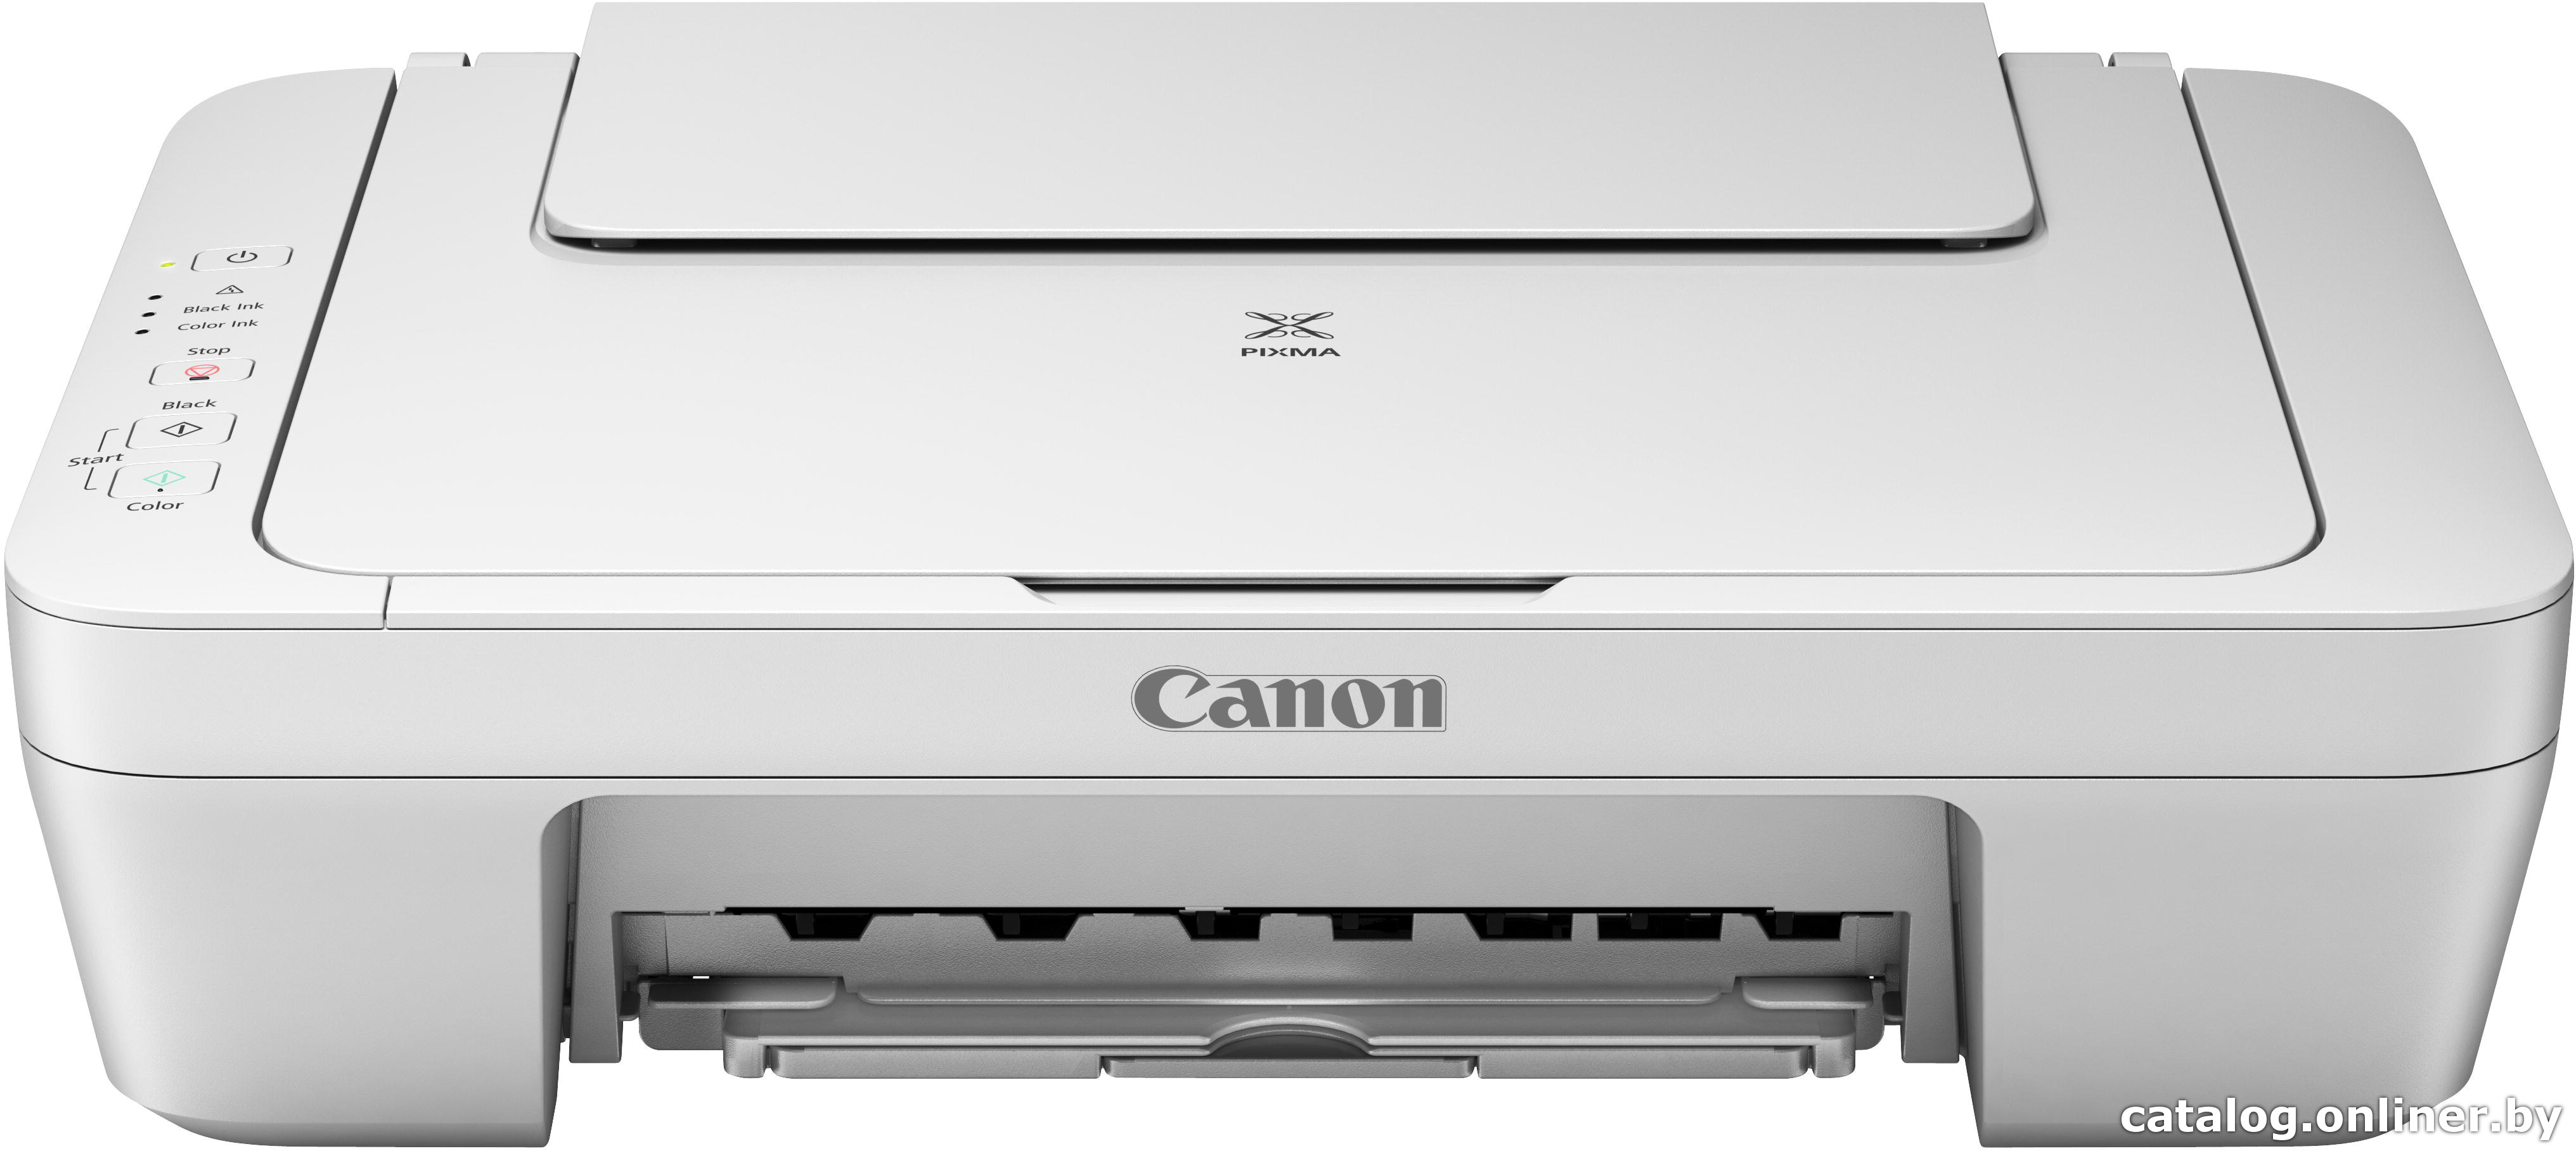 Canon MG2545S Driver Mac Sierra How-to Download and Install - Featured